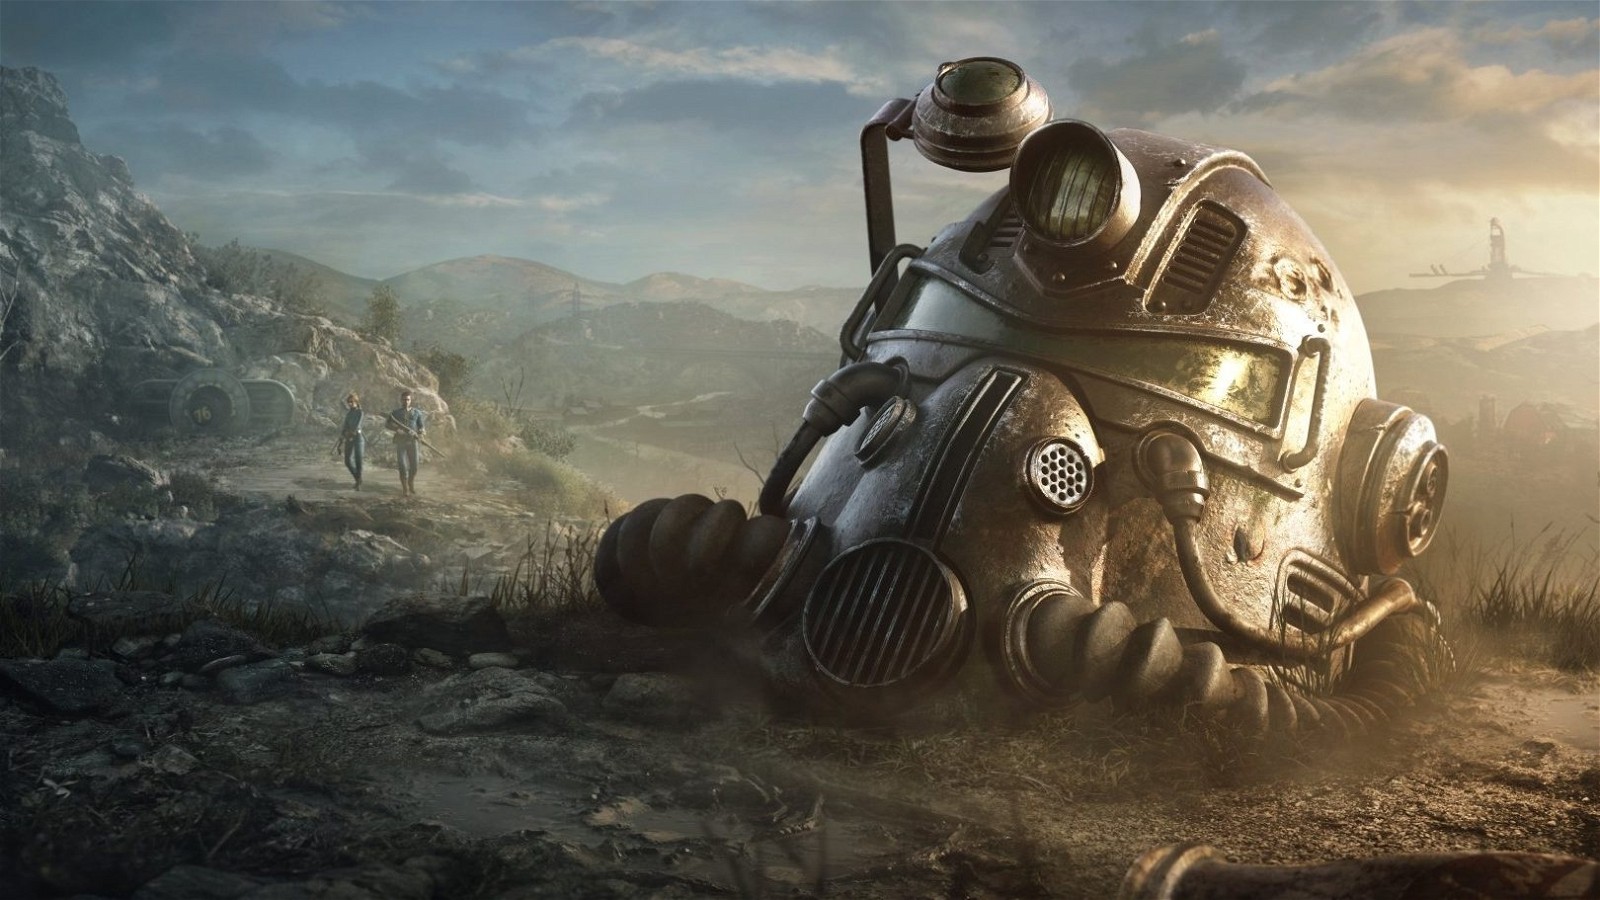 Fallout is still going strong, with Fallout 76 seeing a massive rise in player count. 